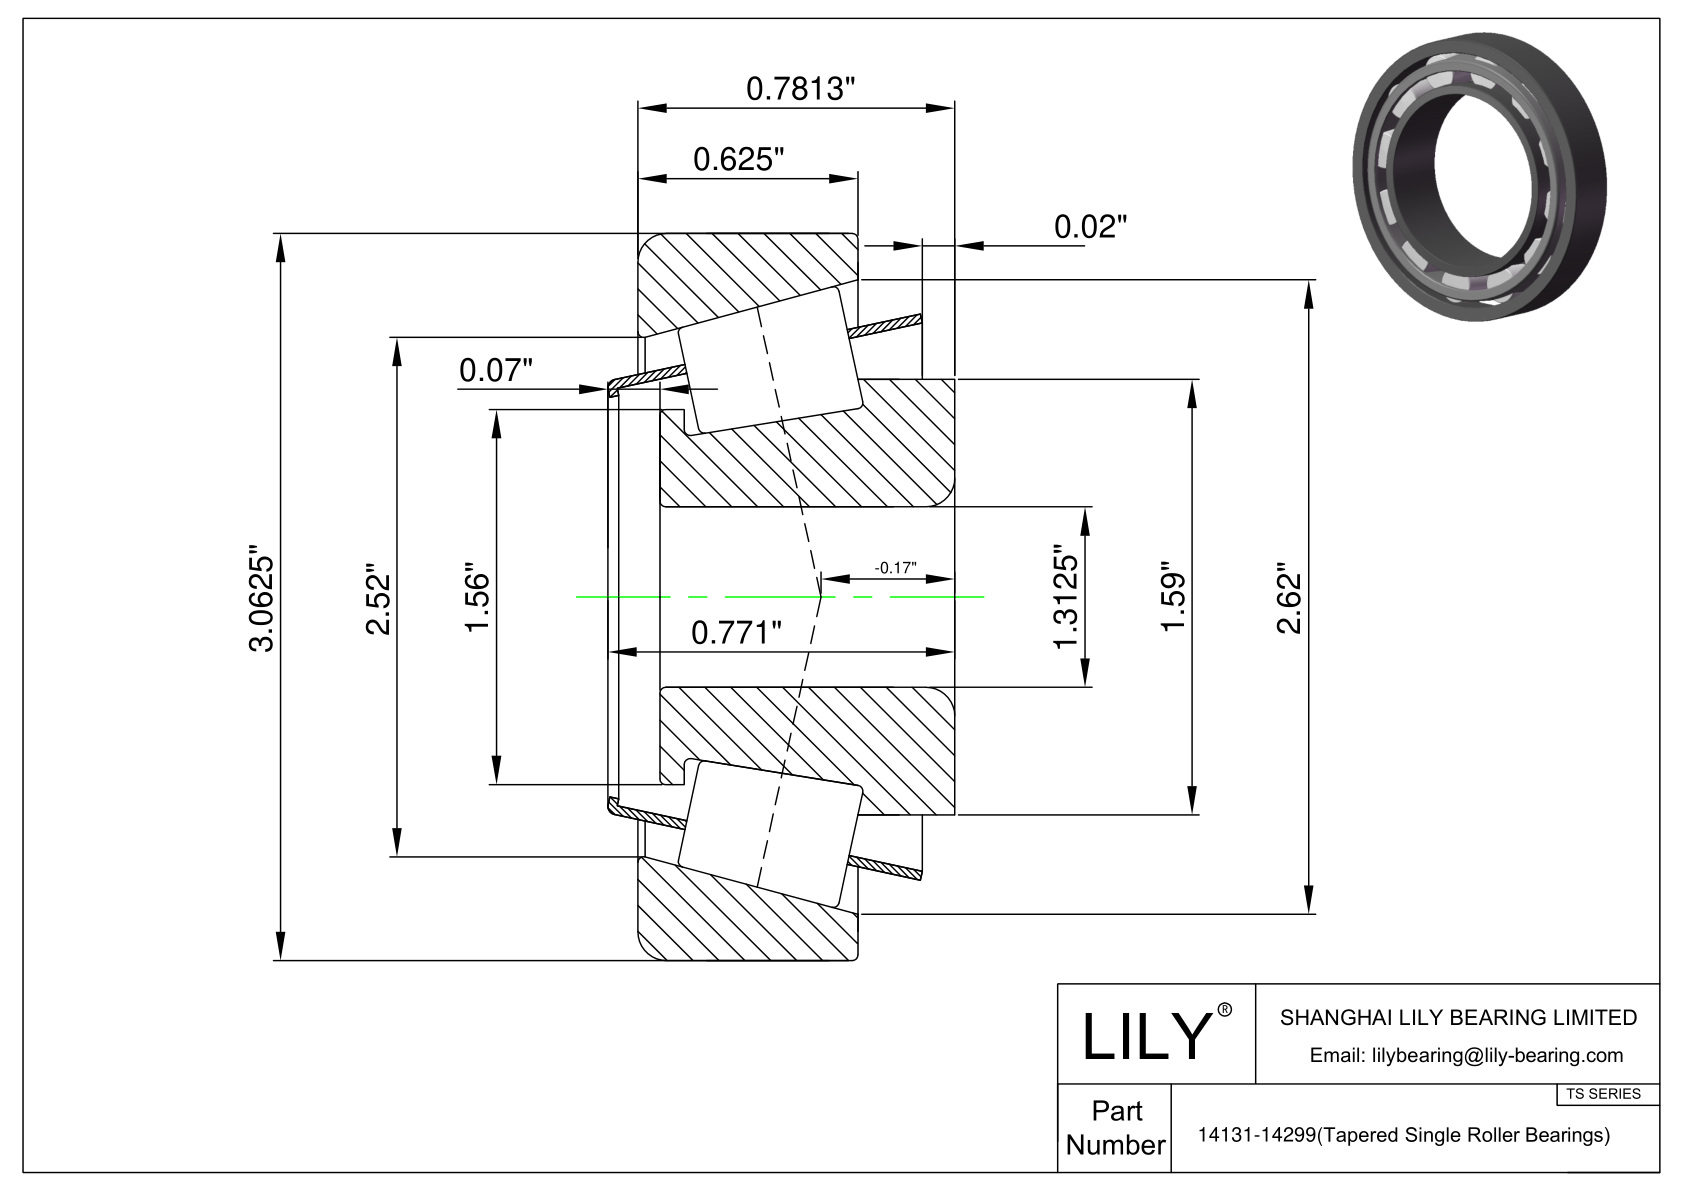 14131-14299 TS (Tapered Single Roller Bearings) (Imperial) cad drawing